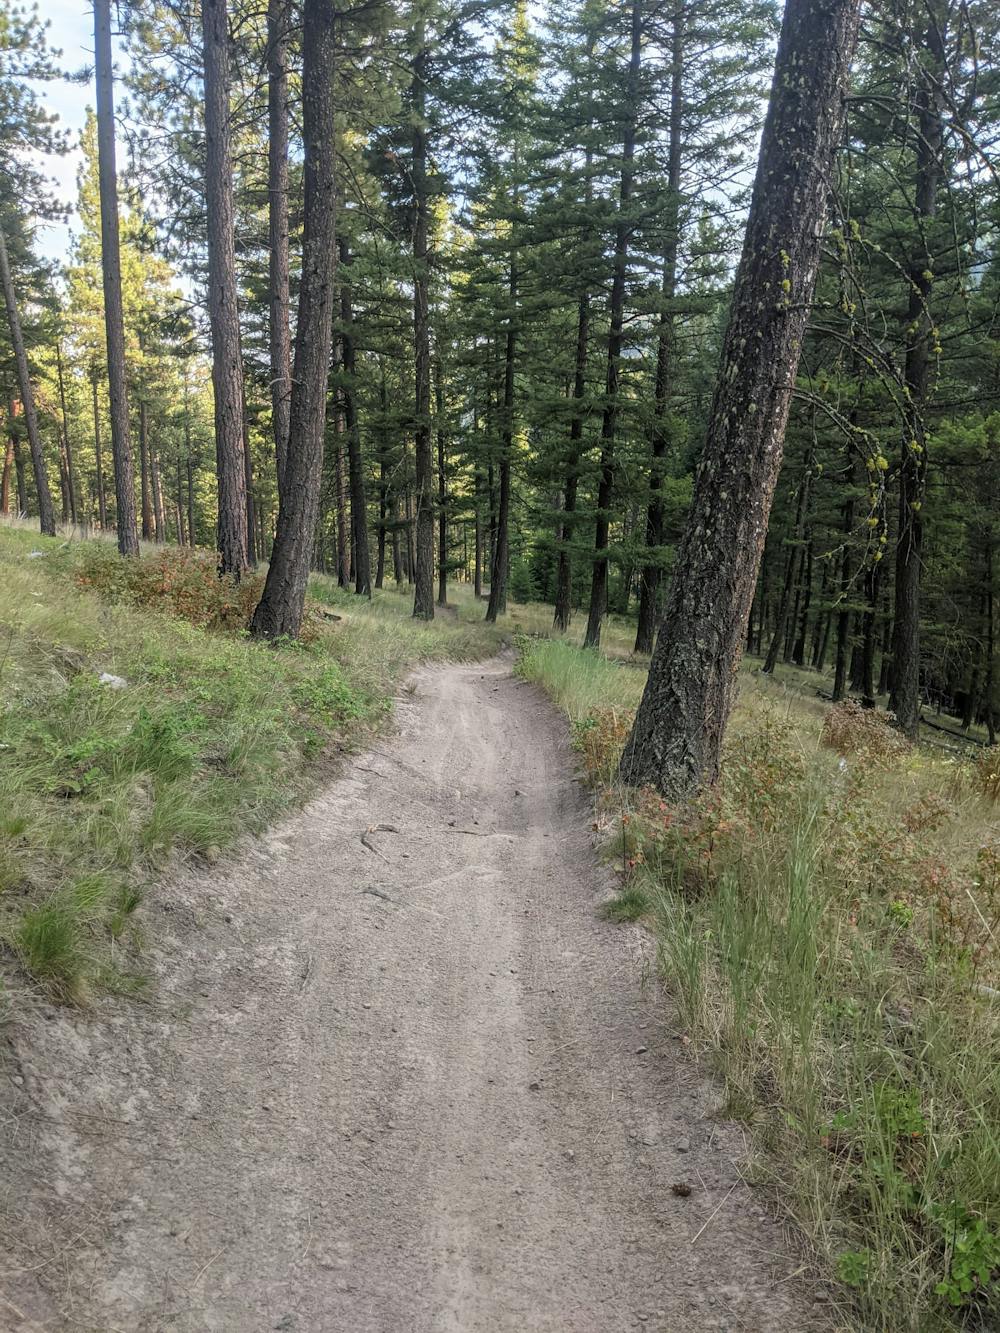 Smooth singletrack makes up most of this route